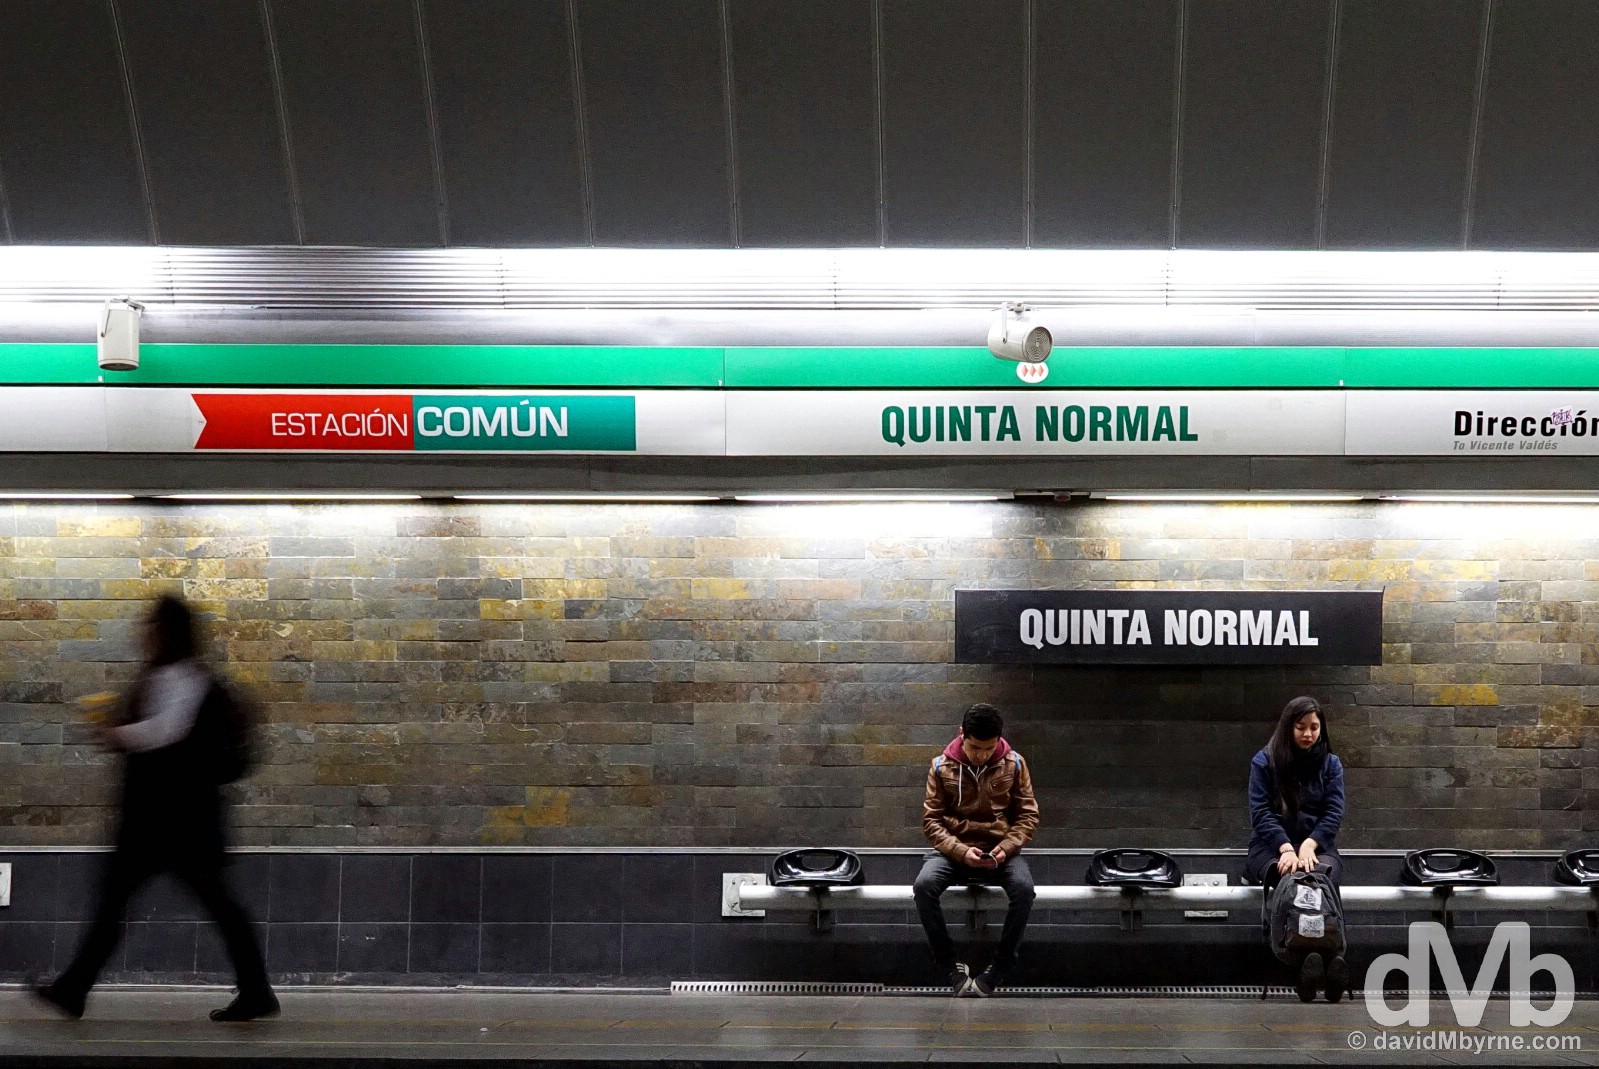 On the platform of Quinta Normal Metro station in Santiago, Chile. October 6, 2015.